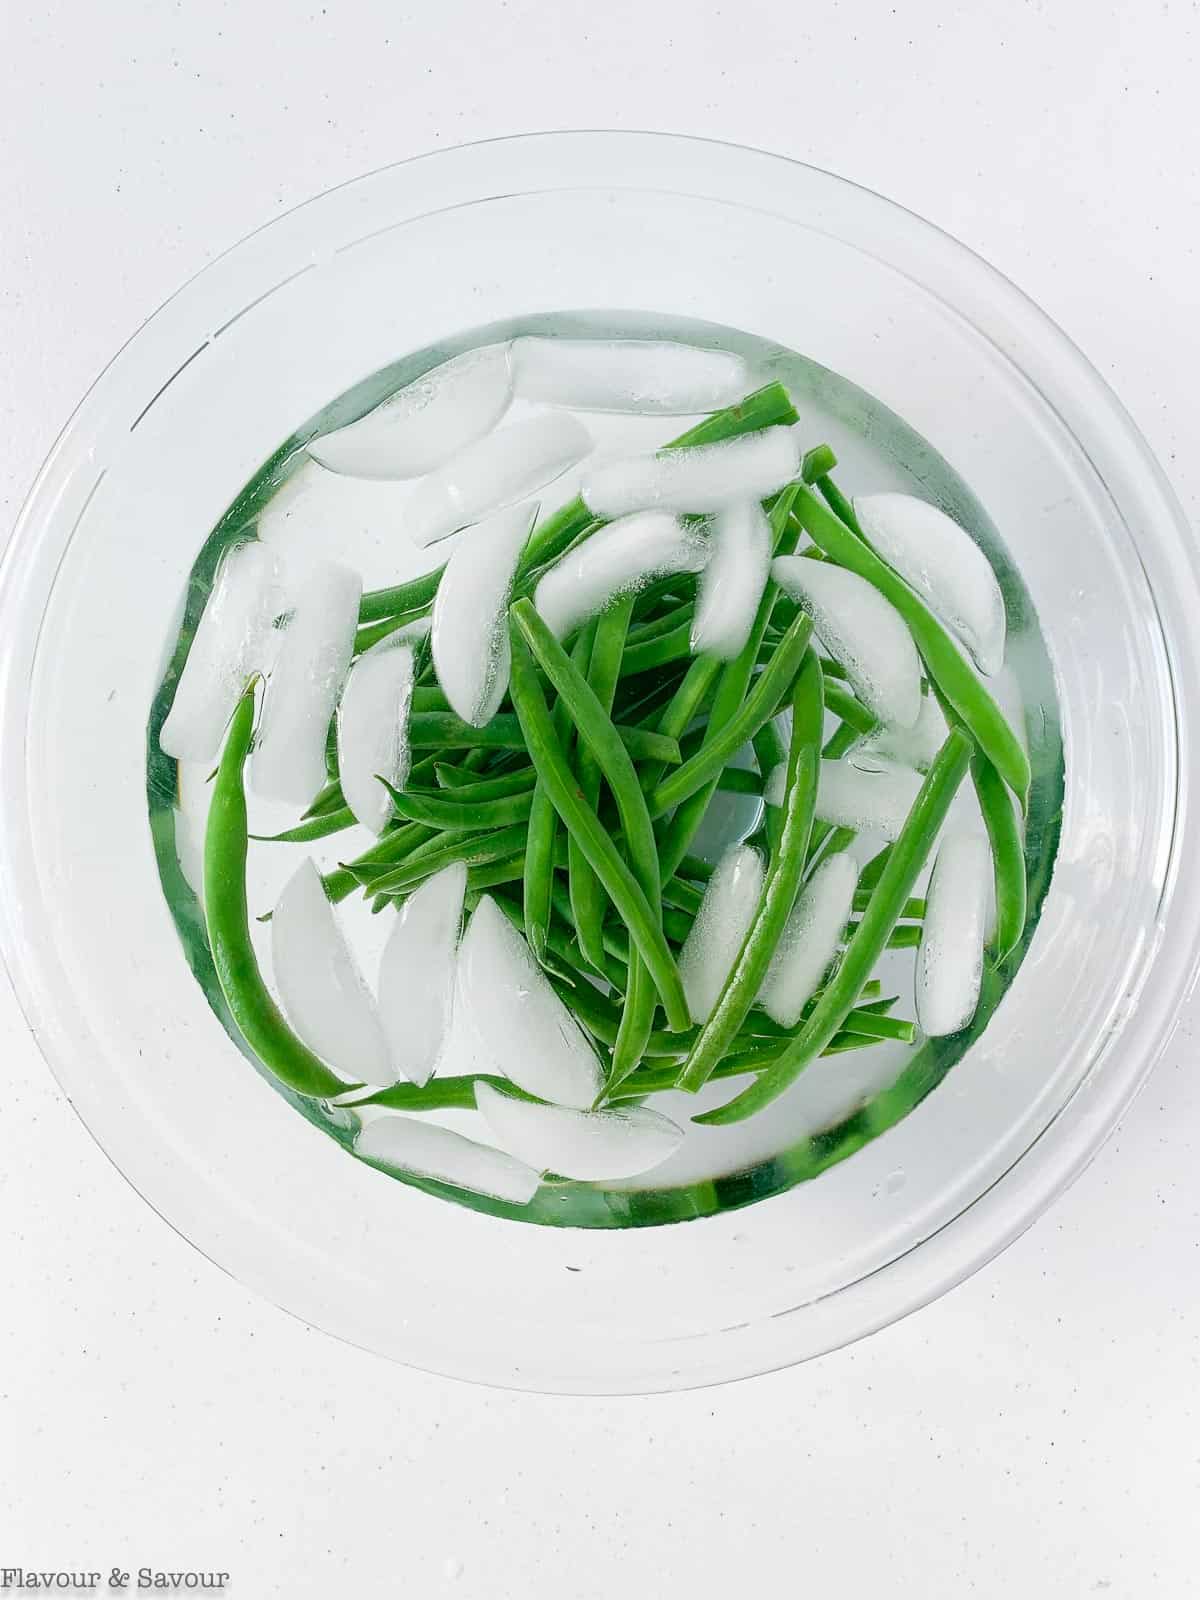 Green beans cooling in an ice bath in a glass bowl.